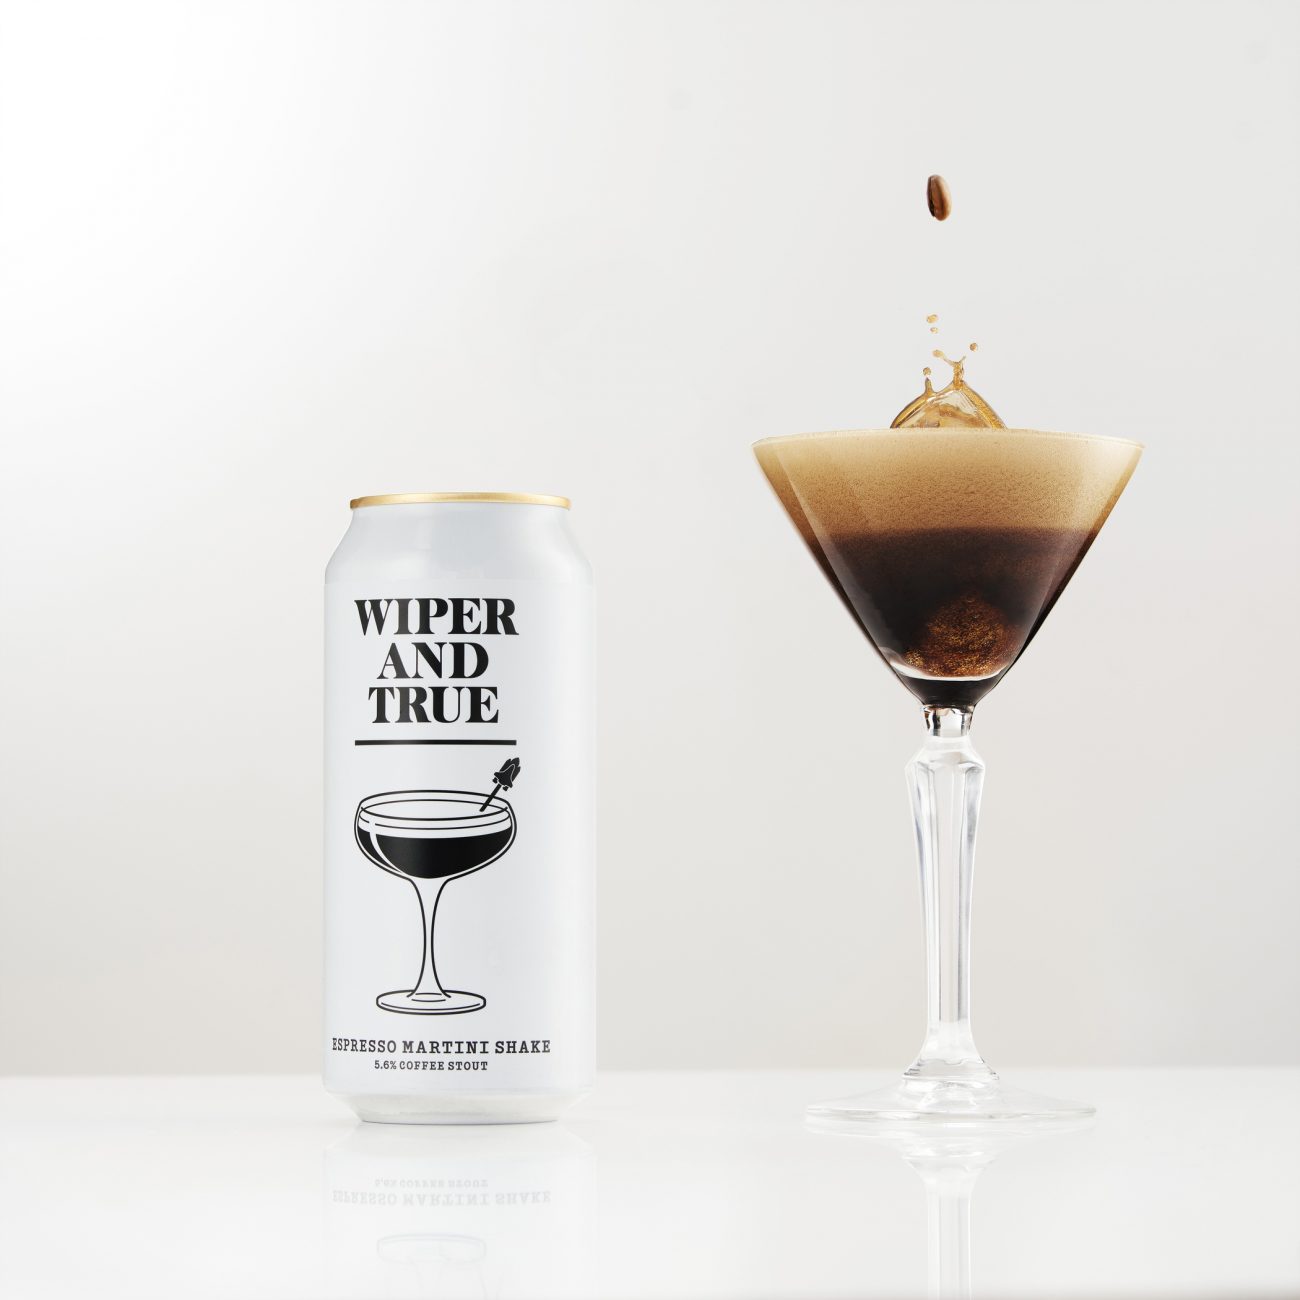 Studio photograph of a can of Wiper and True Espresso Martini Shake beer alongside a filled cocktail glass with a coffee bean splashing into the liquid